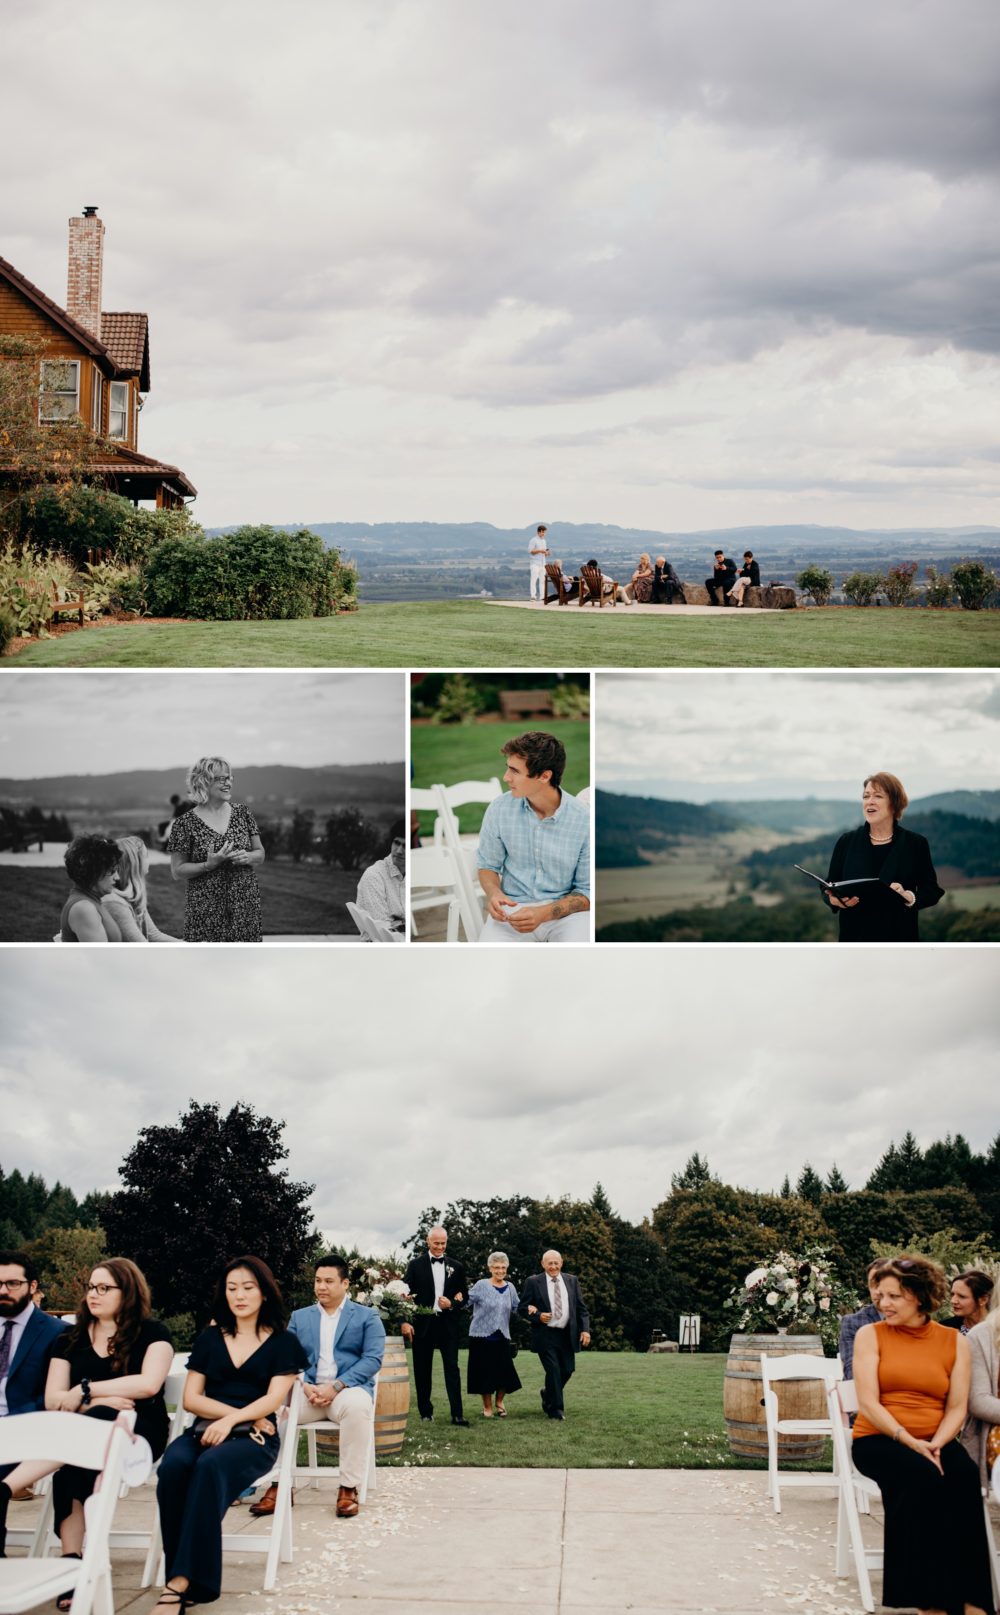 Let's get this wedding ceremony started!  - by Portland Wedding Photographer, Briana Morrison